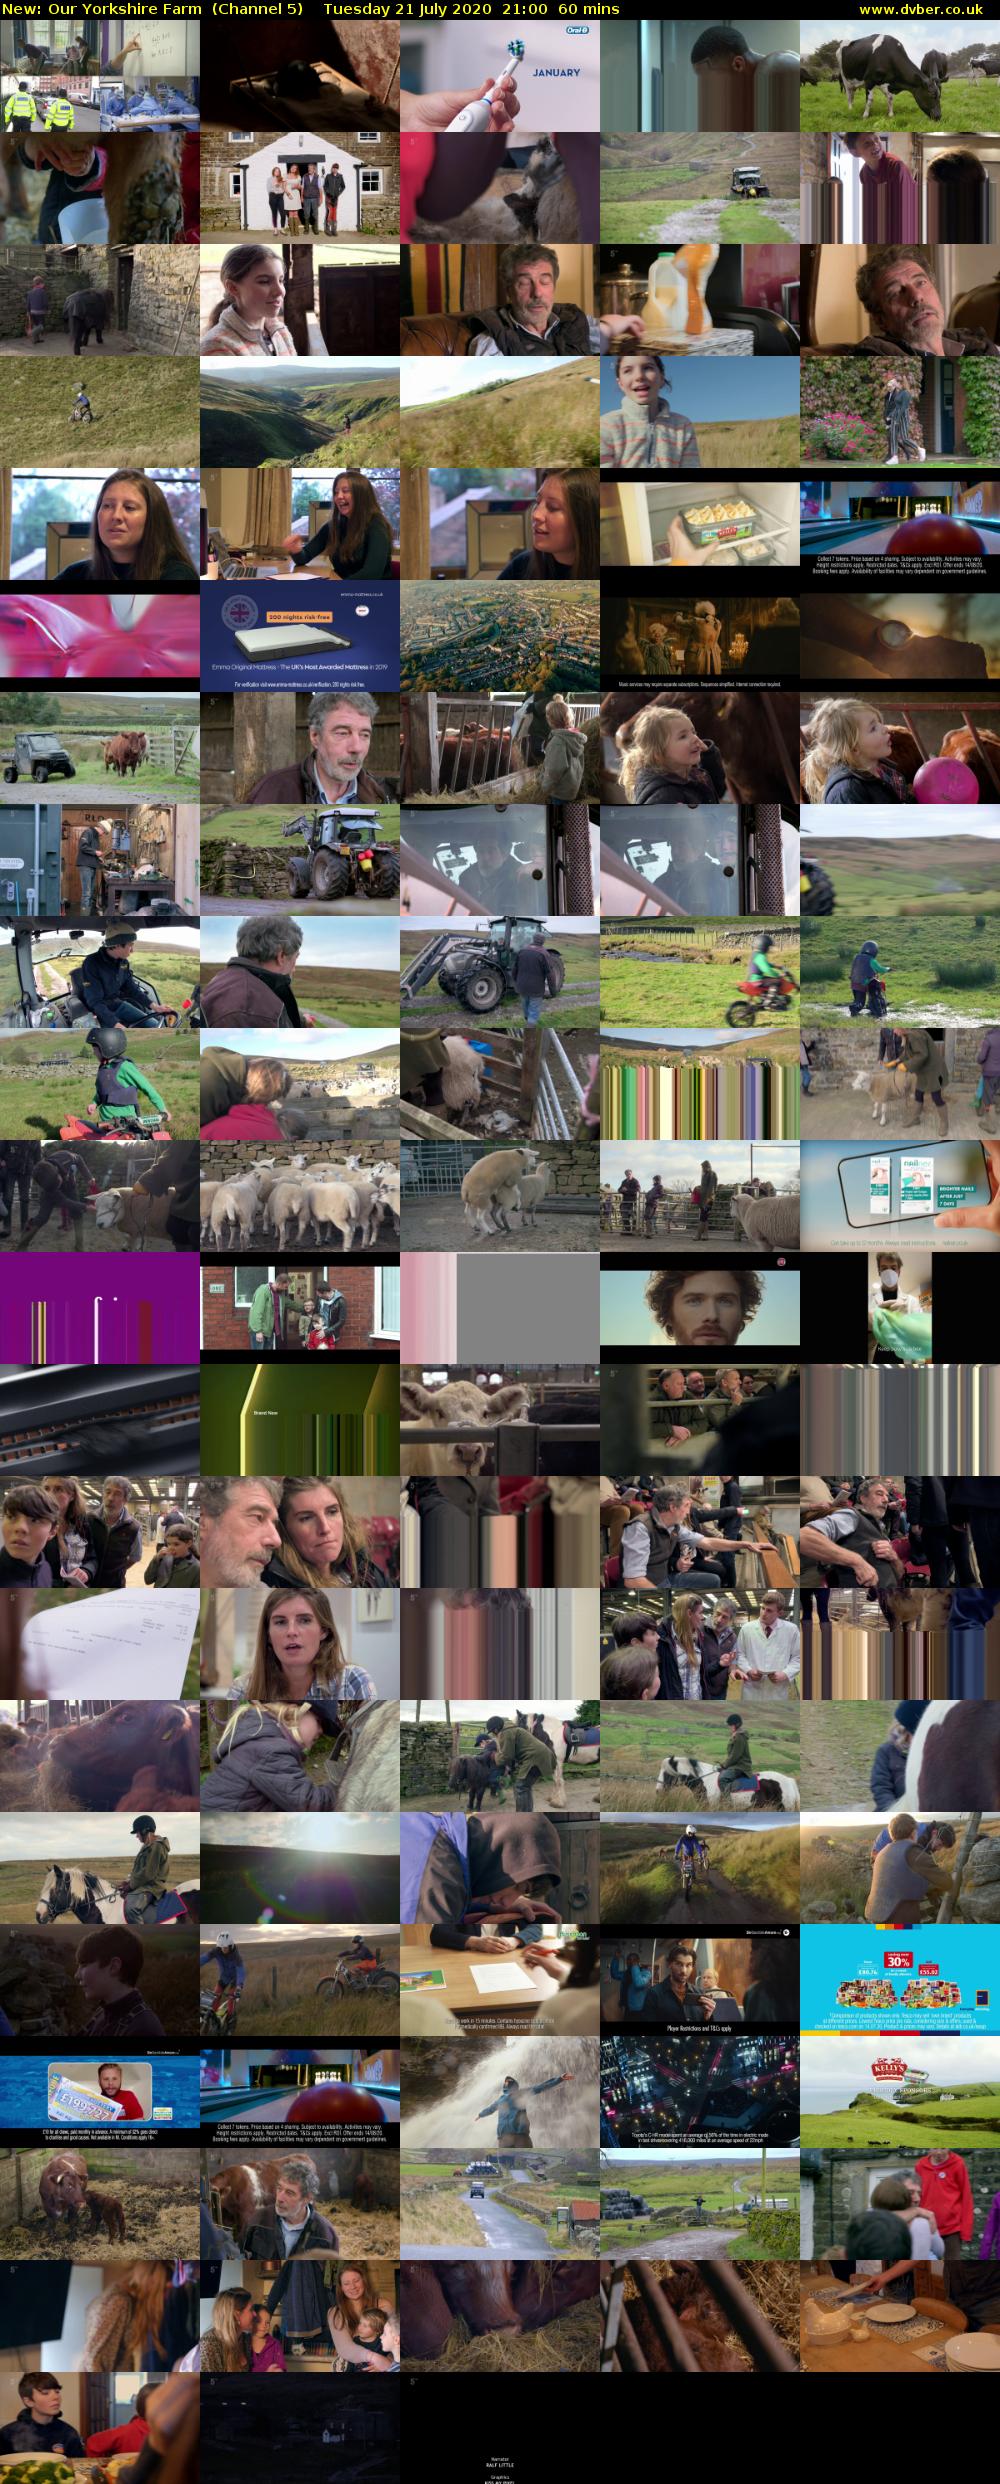 Our Yorkshire Farm (Channel 5) Tuesday 21 July 2020 21:00 - 22:00